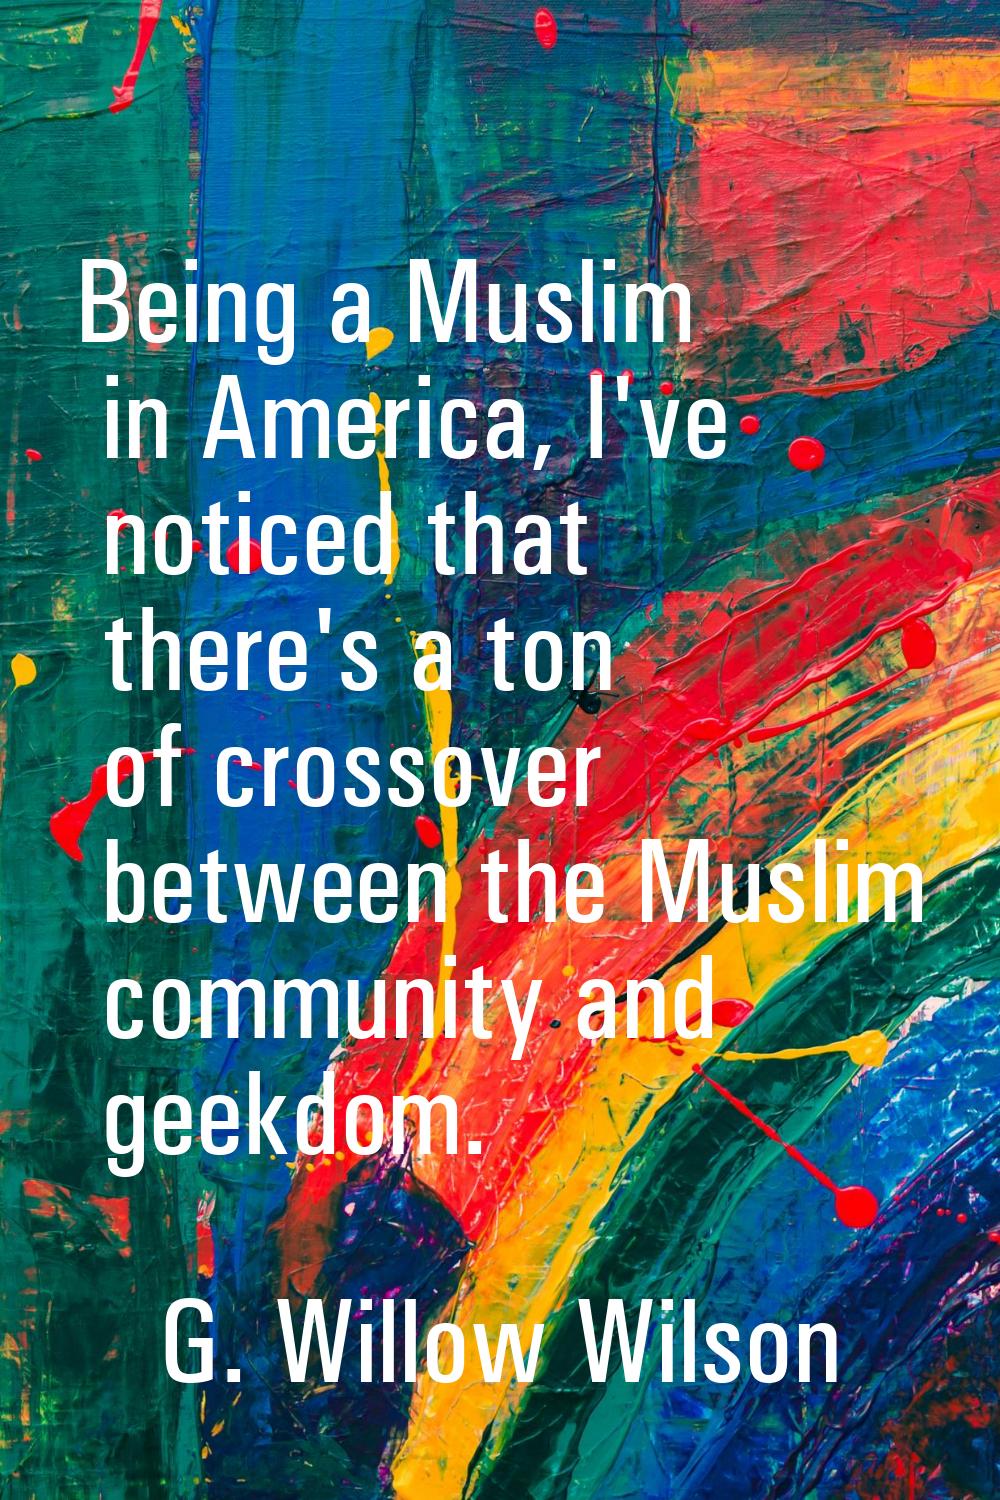 Being a Muslim in America, I've noticed that there's a ton of crossover between the Muslim communit